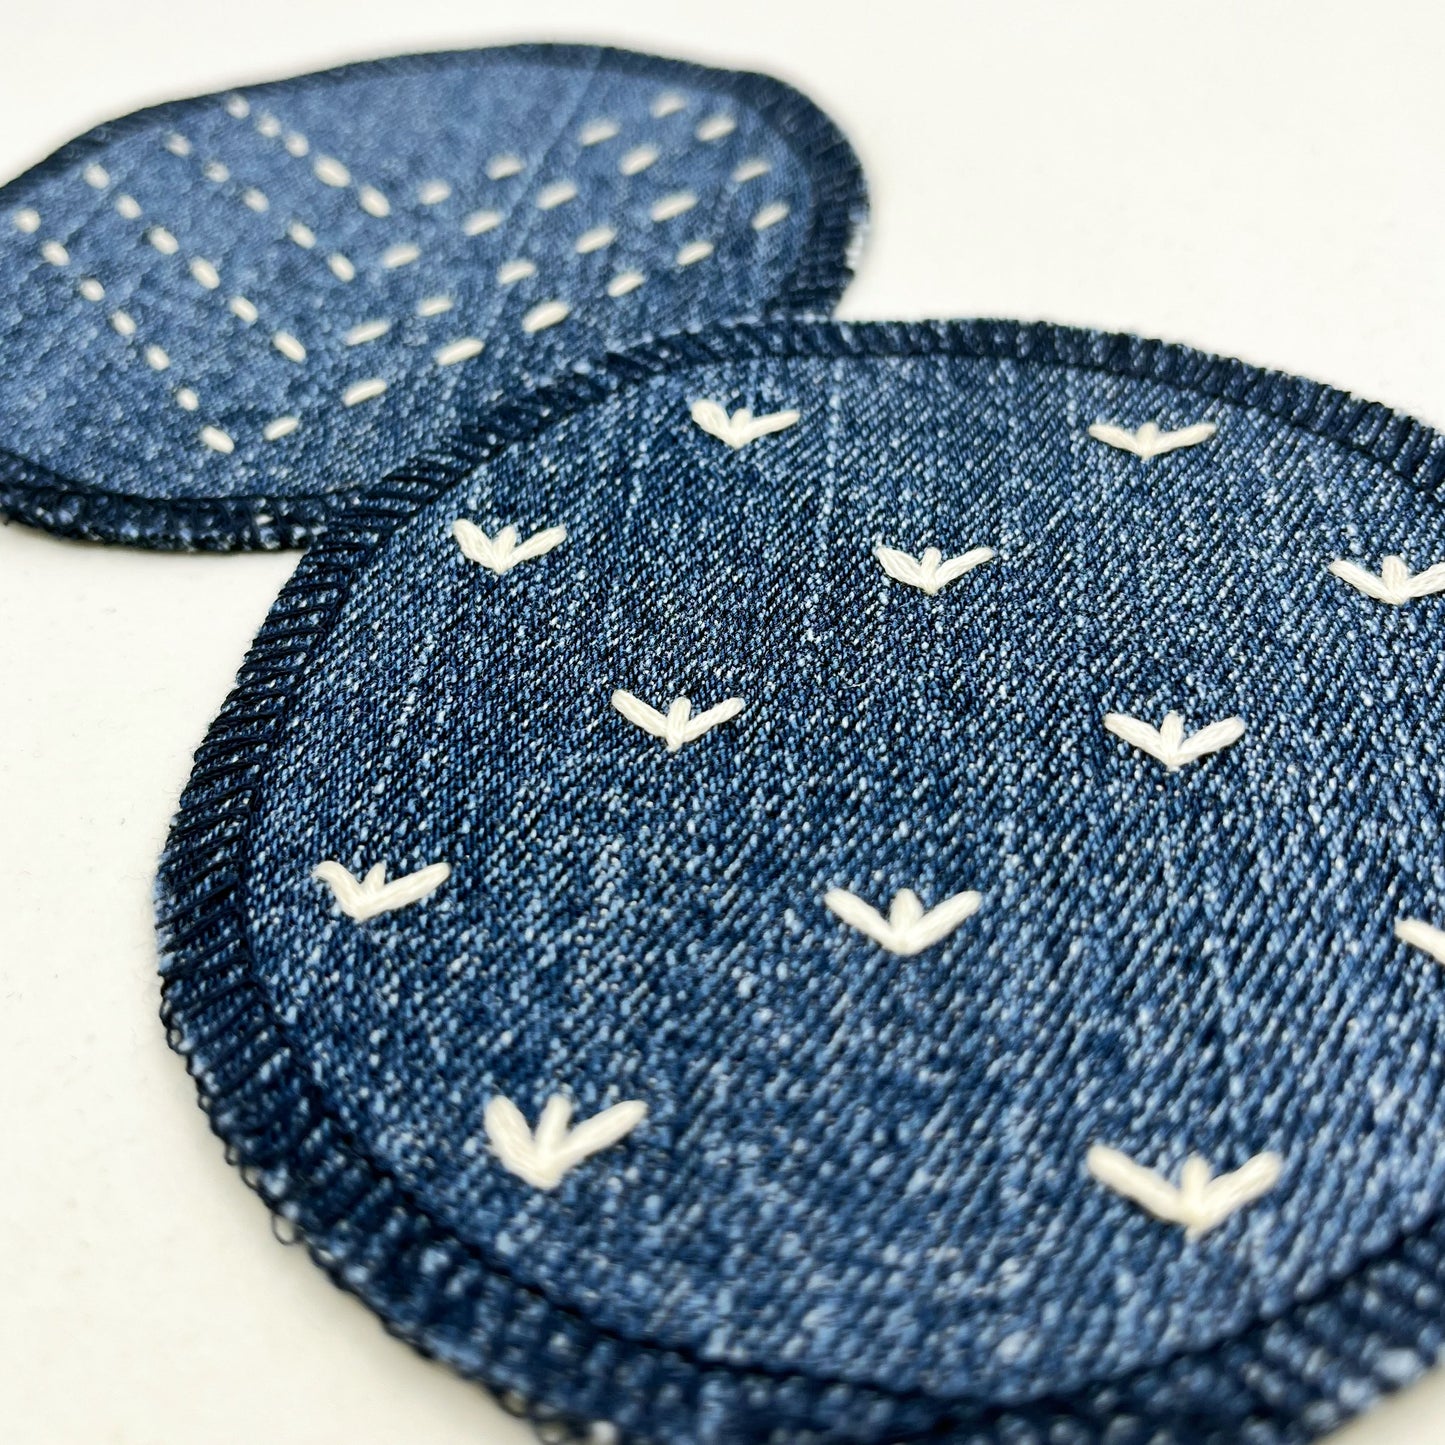 close up angled view of two circle shaped patches made out of denim, with overlocked edges, one with stitches in ivory that look like sprouts or birds feet, the other with rows of running stitches in a chevron pattern